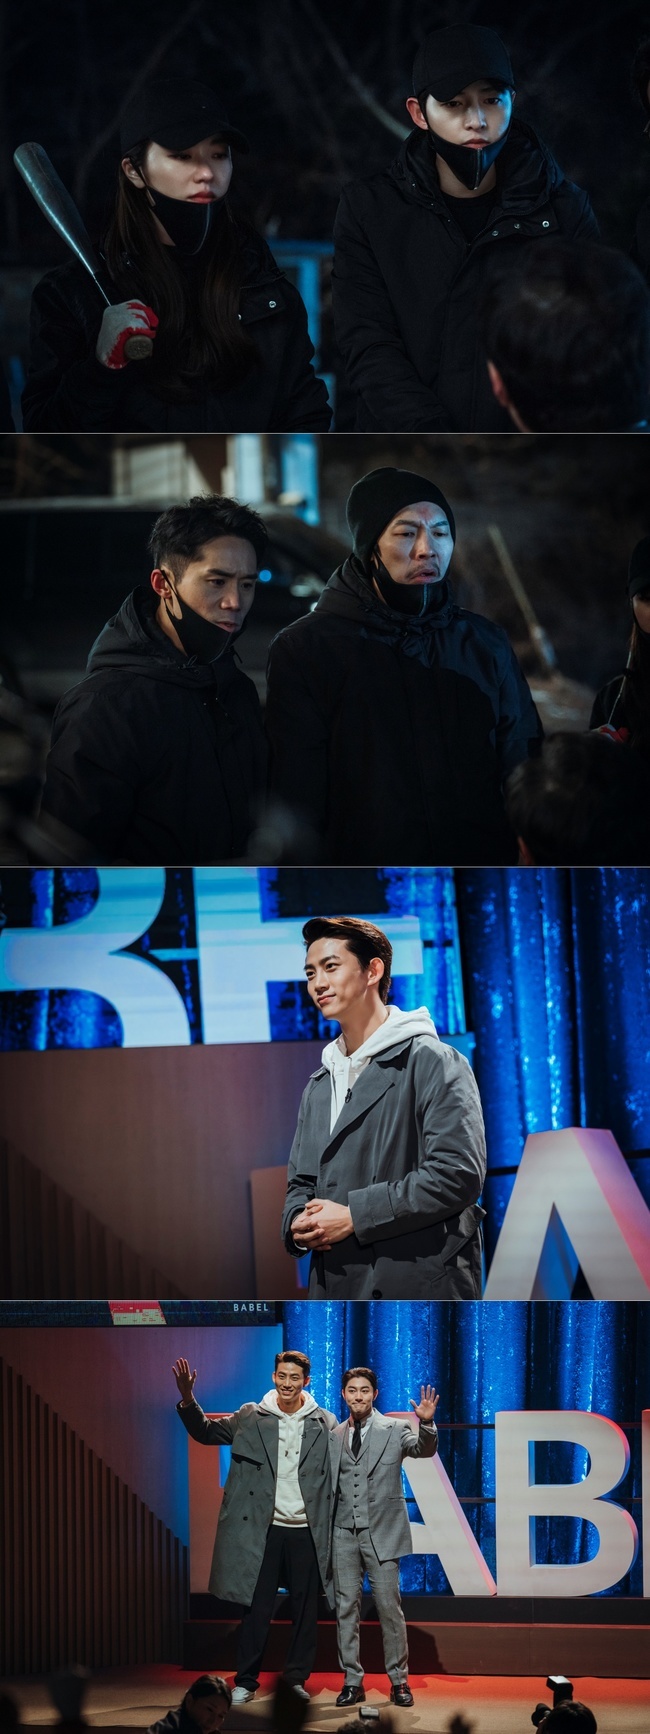 Dark Hero and Billens fierce head-to-head win ensues.TVNs Saturday Drama Vinsenjo (playplayed by Park Jae-beom/directed by Kim Hee-won) released images of Vincenzo and Hong Cha-young (played by Jeon Yeo-been), who prepared another trap to smash Babel on April 3.Jang Jun-woo (Ok Taek Yeon), who took office as the official chairman, and the sparking bout of Dark Heroes stimulate expectations.When he learned that the real boss of Babel, Jang Han-seok (Ok Taek Yeon), was Jang Jun-woo, Vincenzo and Hong Cha-young pulled him out to the world and wrote a new edition to bring down Babel.Meanwhile, cracks inside the villas also increased tension, as Jang Han-seo (Kwak Dong-yeon), who lived as Marionette of his brother Jang Jun-woo, began to reveal his ambition.Jang Han-seo, who was out hunting and looking at the opportunity, shot Jang Jun-woo.The operation failed in the awkward attack, but the collusion between Jang Han-seo, who is moving to hit Jang Jun-woo, and Han Seung-hyuk (Jo Han-cheol), who encourages him, emerged as a new variable.Meanwhile, Vincenzo finally opened the door of the underground secret room with the chief of the investigation (Choi Young-joon), but at the thrilling moment of facing the gold, the inspector pointed the gun at Vincenzo and a reversal occurred.Vincenzo found out that the guillotine file containing the corruption of high-ranking officials was hidden in the underground room, and predicted an unpredictable development.The photo shows Vincenzo and Hong Cha-young, who are working on a new operation against Babel, and the two people who stand with baseball bats steal their eyes.Lee Cheol-wook (Yang Kyung-won), president of the pawn shop, and Ahn Ki-seok (Lim Cheol-soo), team leader of the Foreign Security Information Service, are also caught together, adding curiosity.I wonder if the full swing of the Dark Heroes, who have decided and come at it, can hit the Villans hotly.It is interesting to see Jang Jun who appeared in the world. Jang Jun who hid the reality of Socio Pass in a soft smile.His mask, which is spotlighted with his affectionate appearance, causes creepyness.Attention is focusing on how he will take out the counterattack of Dark Heroes in front of Vincenzo and Hong Cha Young.